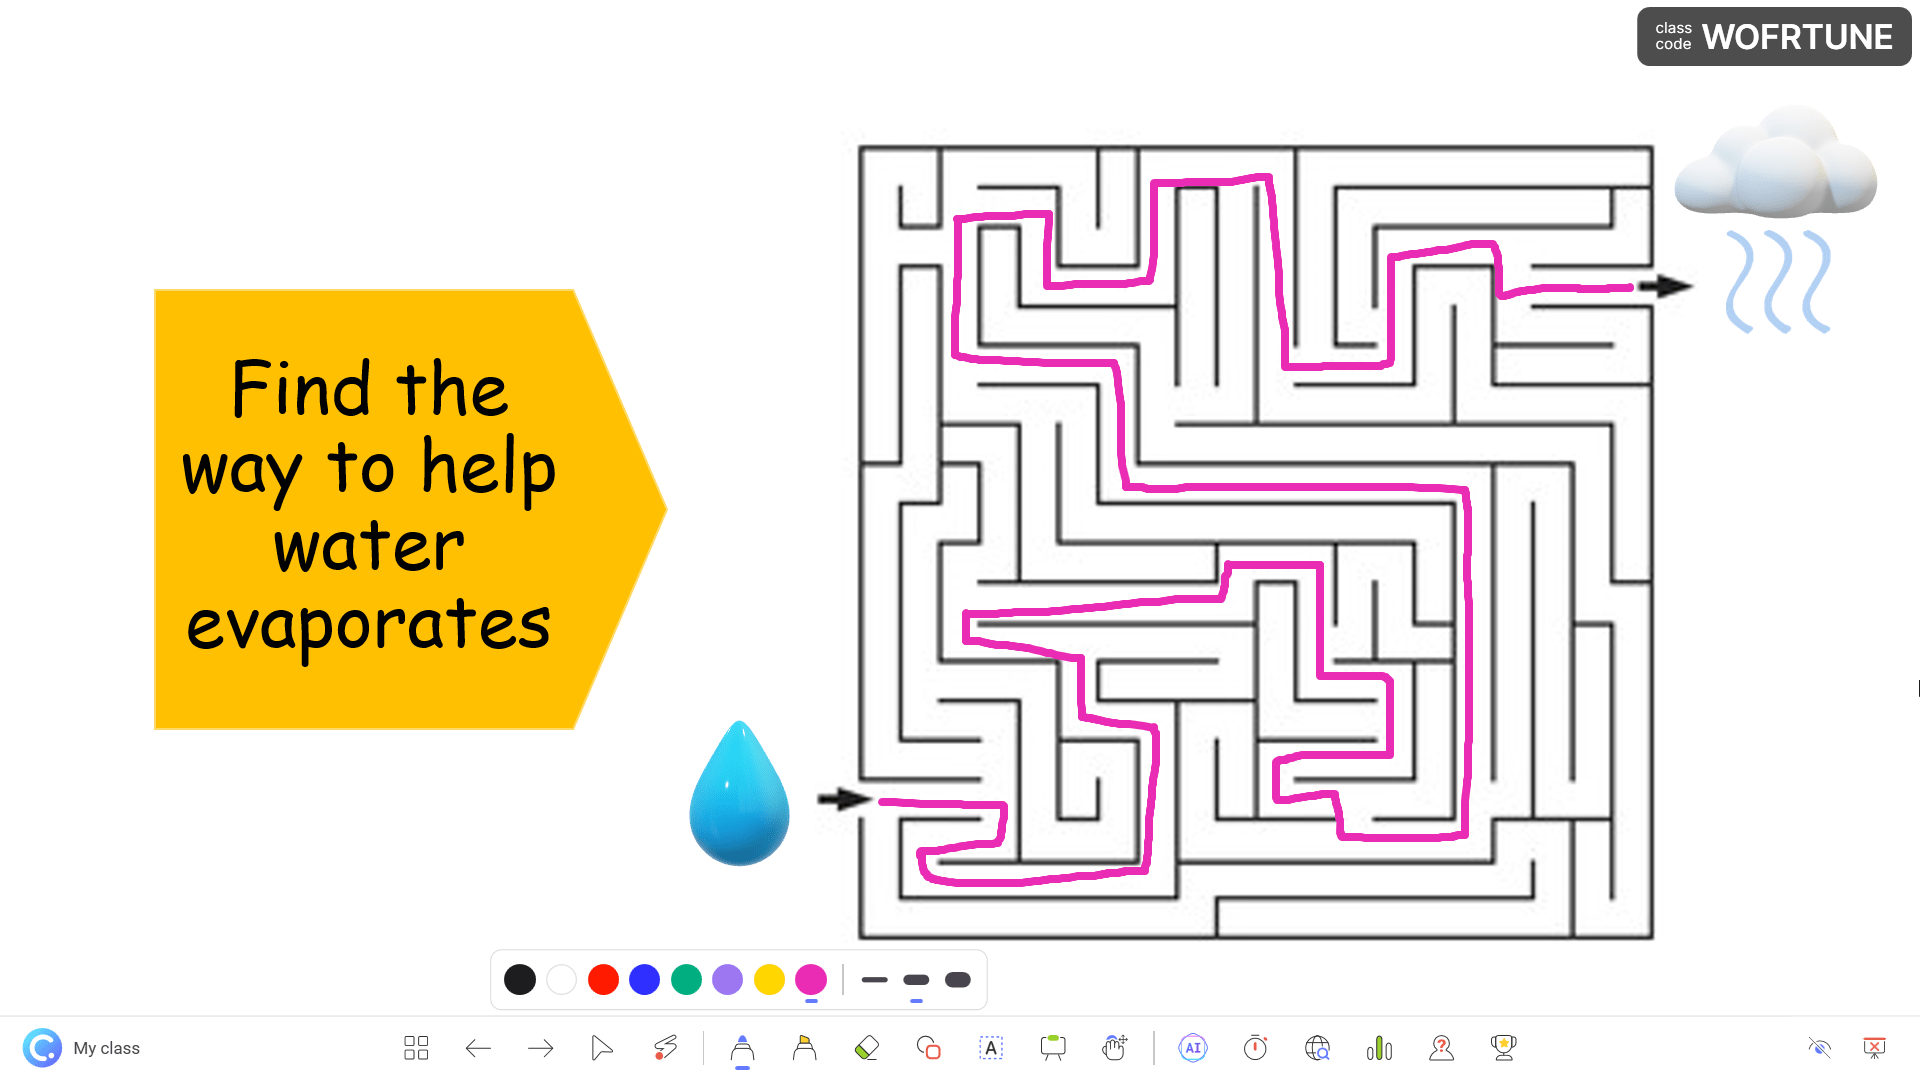 powerpoint games - the maze or finding the way